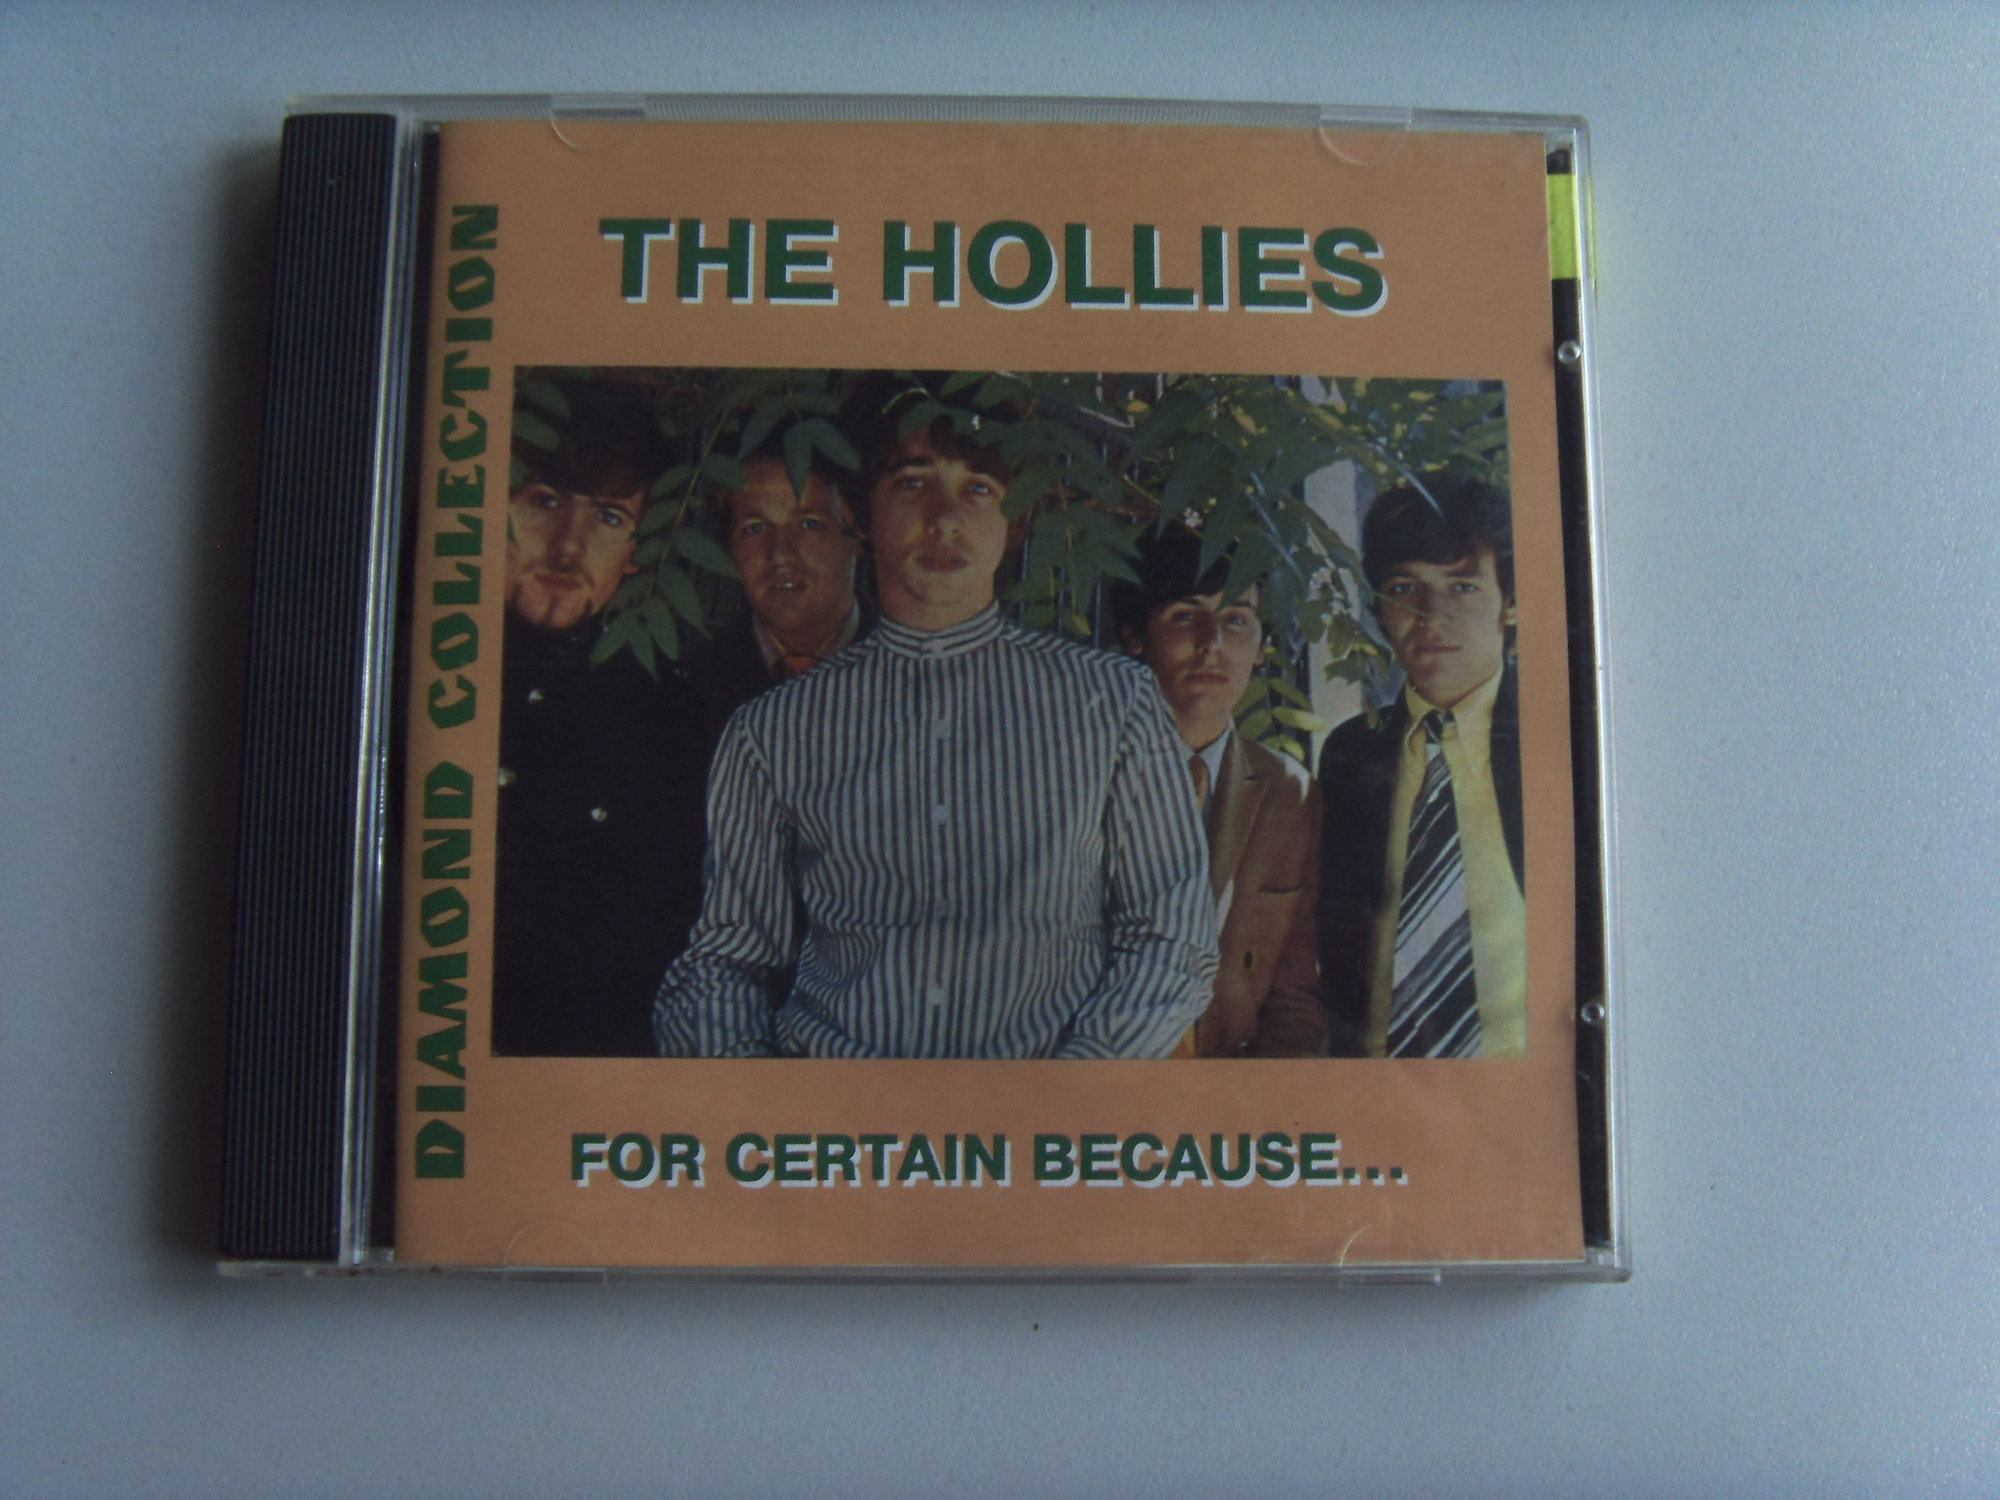 THE HOLLIES For certain because